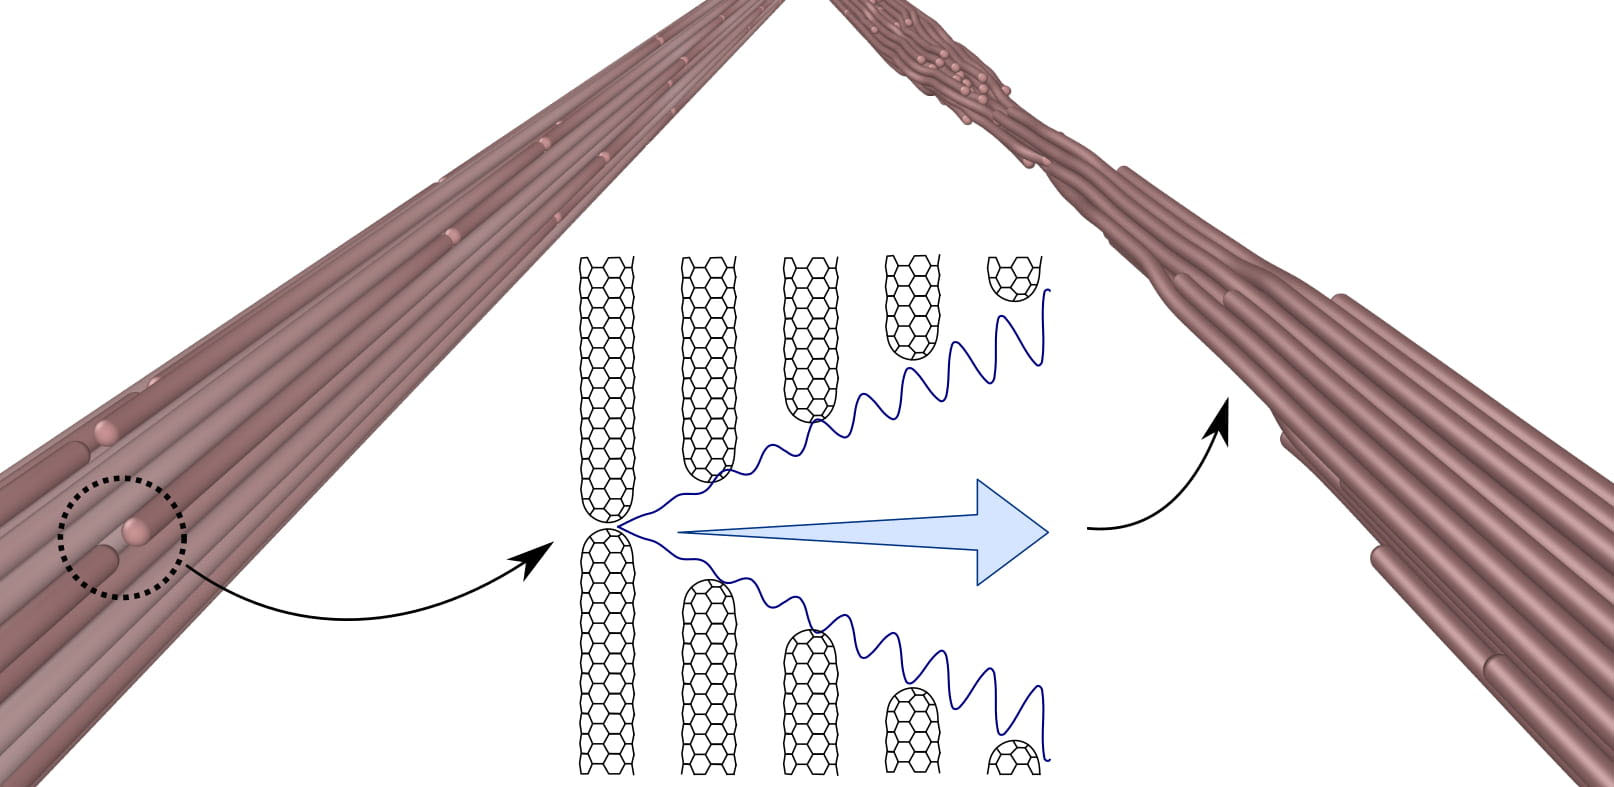 cyclic loading of nanotube fibers leads to strain ratcheting that can eventually lead to the failure of the fiber